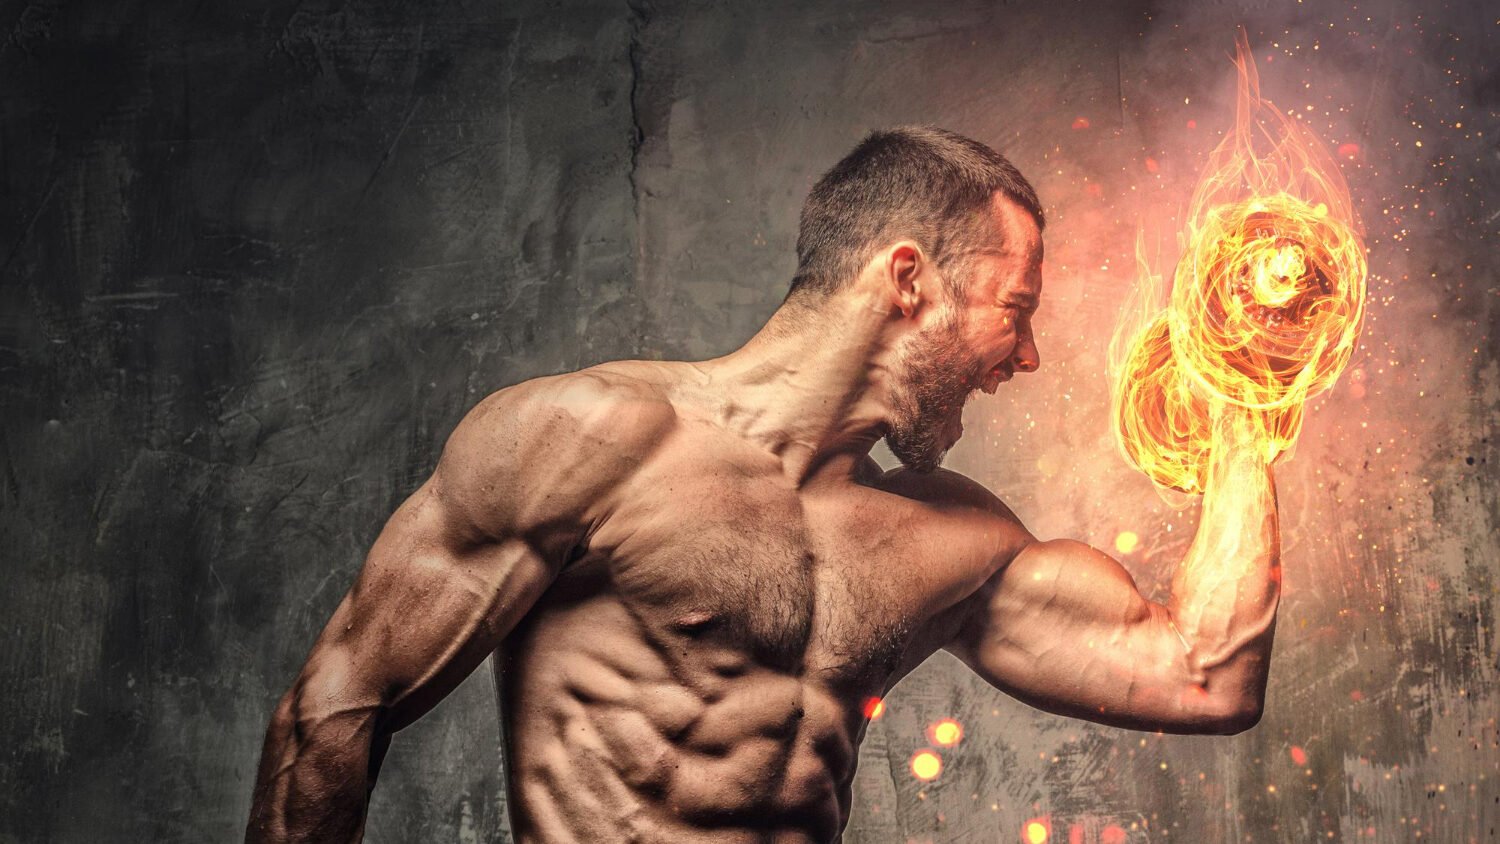 Artistic Portrait Shirtless Muscular Male With Burning Dumbbell